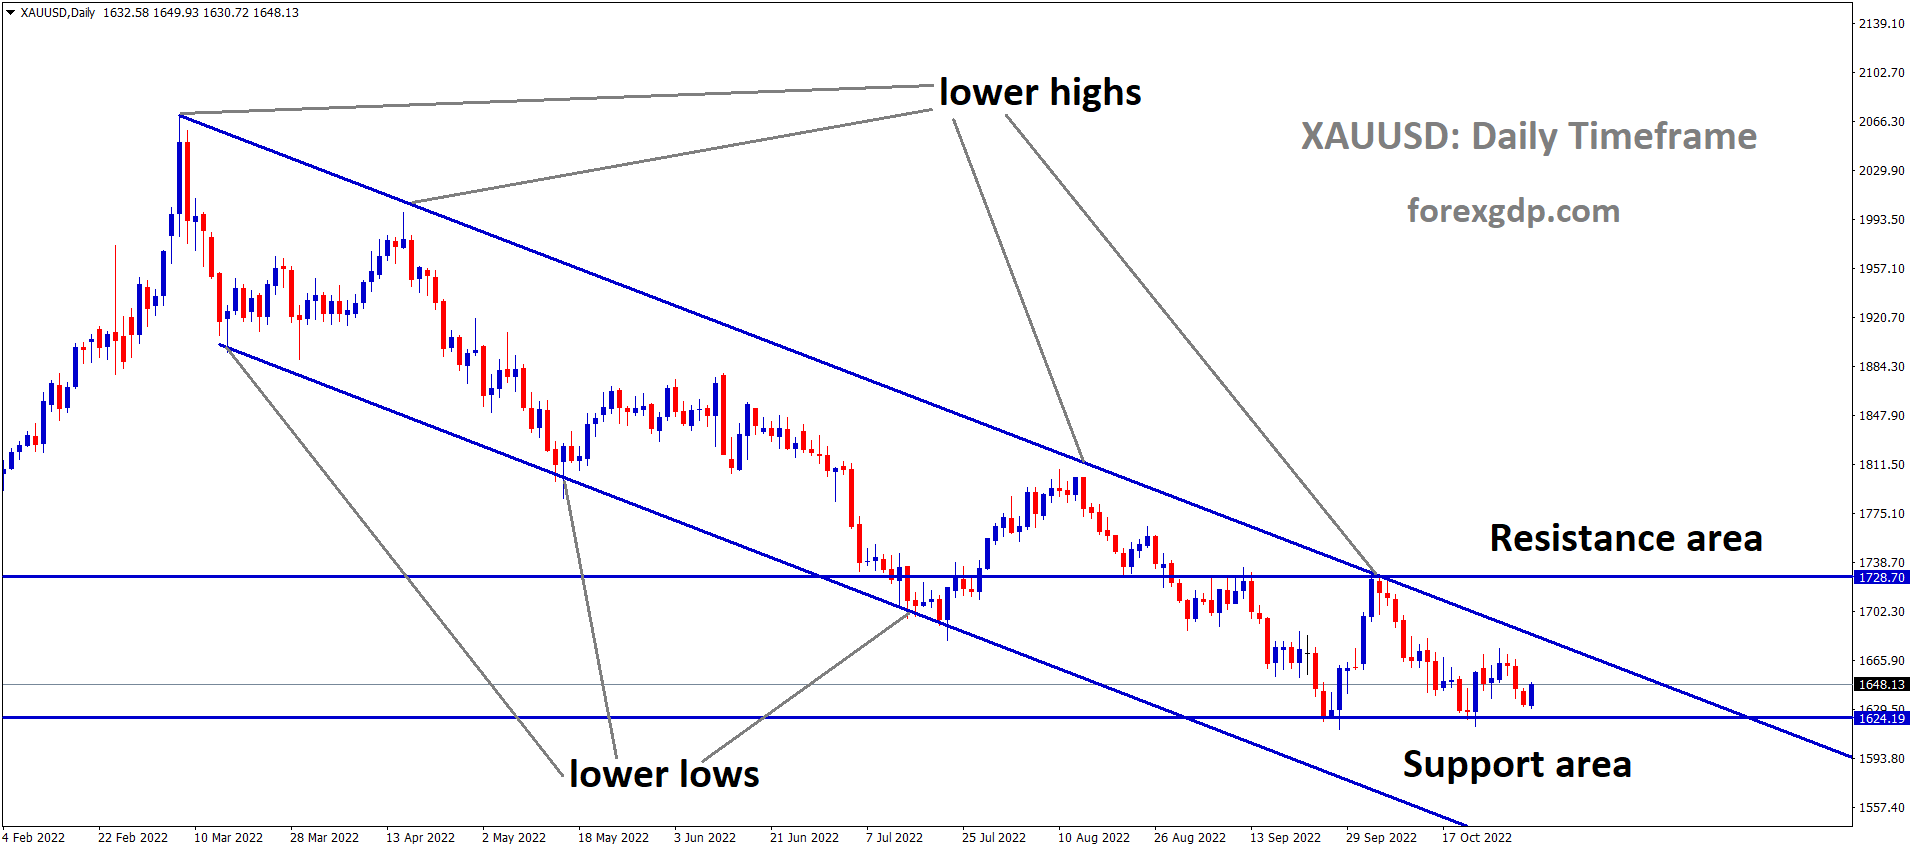 XAUUSD Gold price is moving in the Descending channel and the market has rebounded from the horizontal support area of the minor Box Pattern